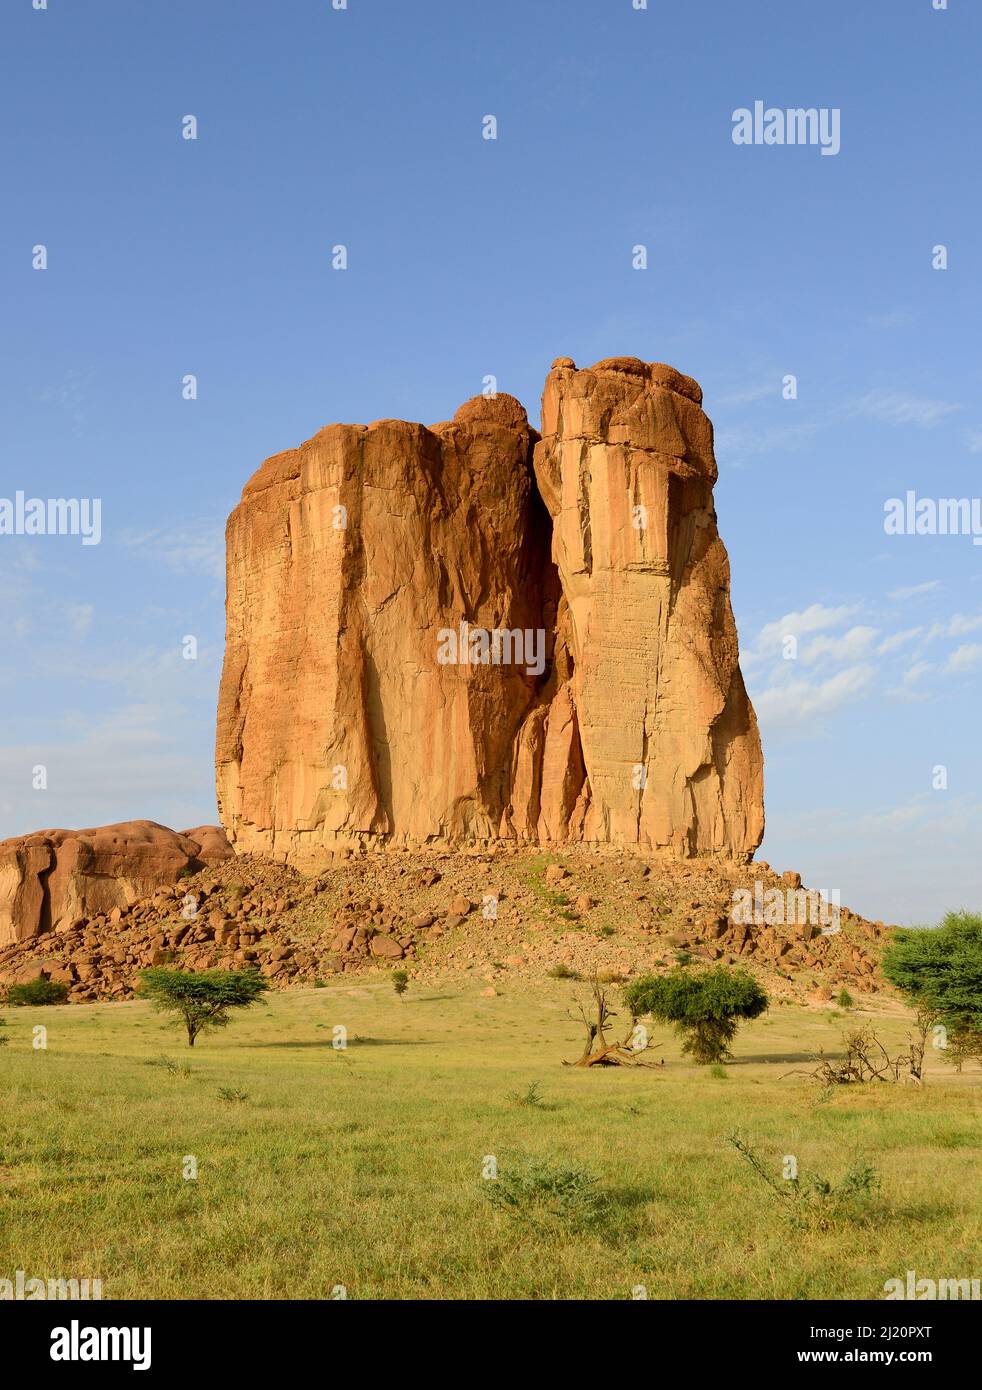 Eroded sandstone rock formation standing out in plateau  in the Sahara desert,  Ennedi Natural And Cultural Reserve, UNESCO World Heritage Site, Chad. Stock Photo